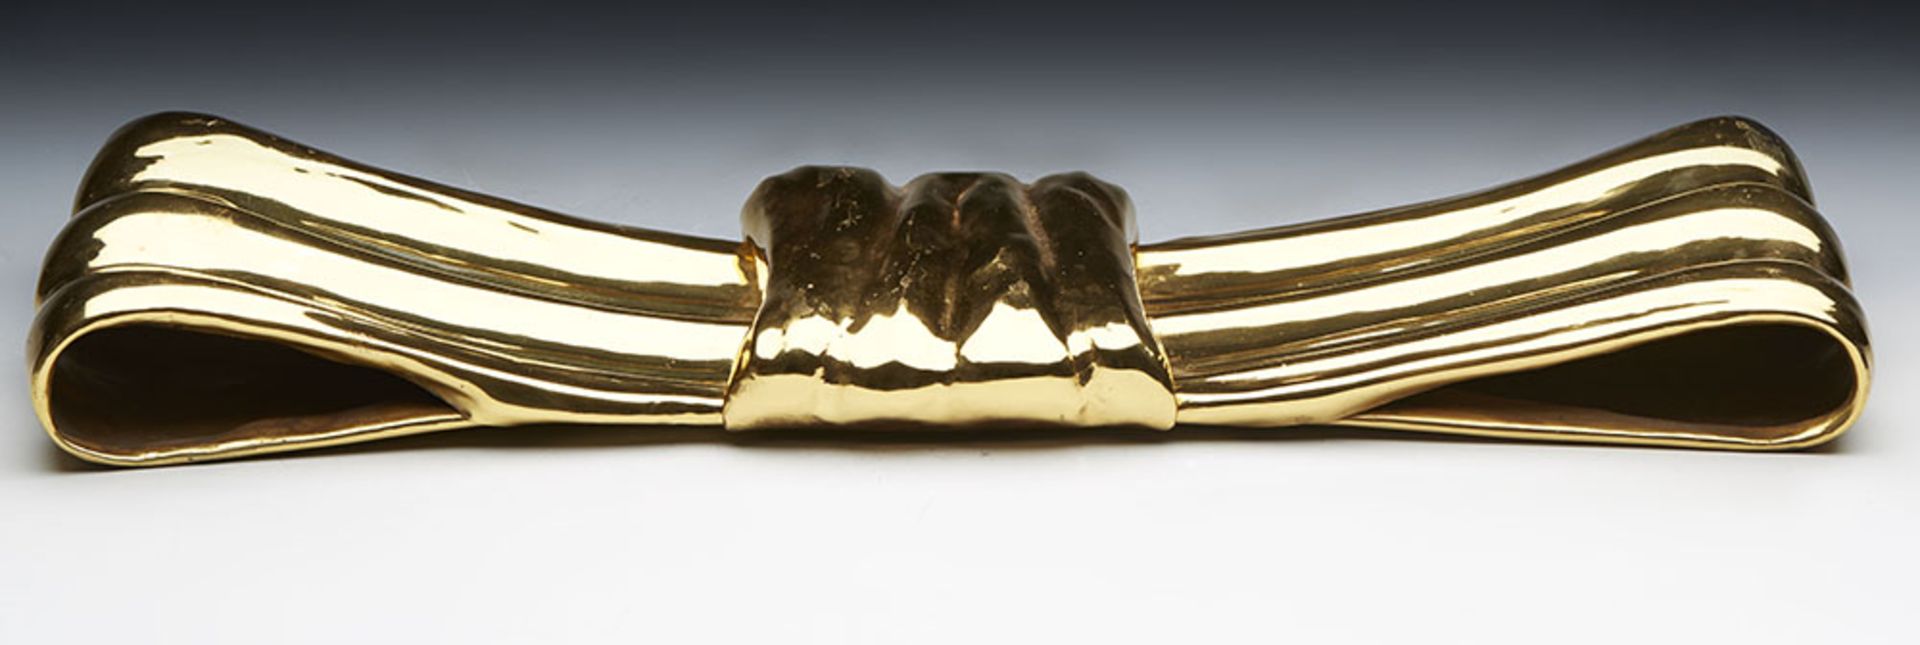 Dulany Studio Gilt Metal Bow By Helen Hughes Early 20Th C. - Image 10 of 11